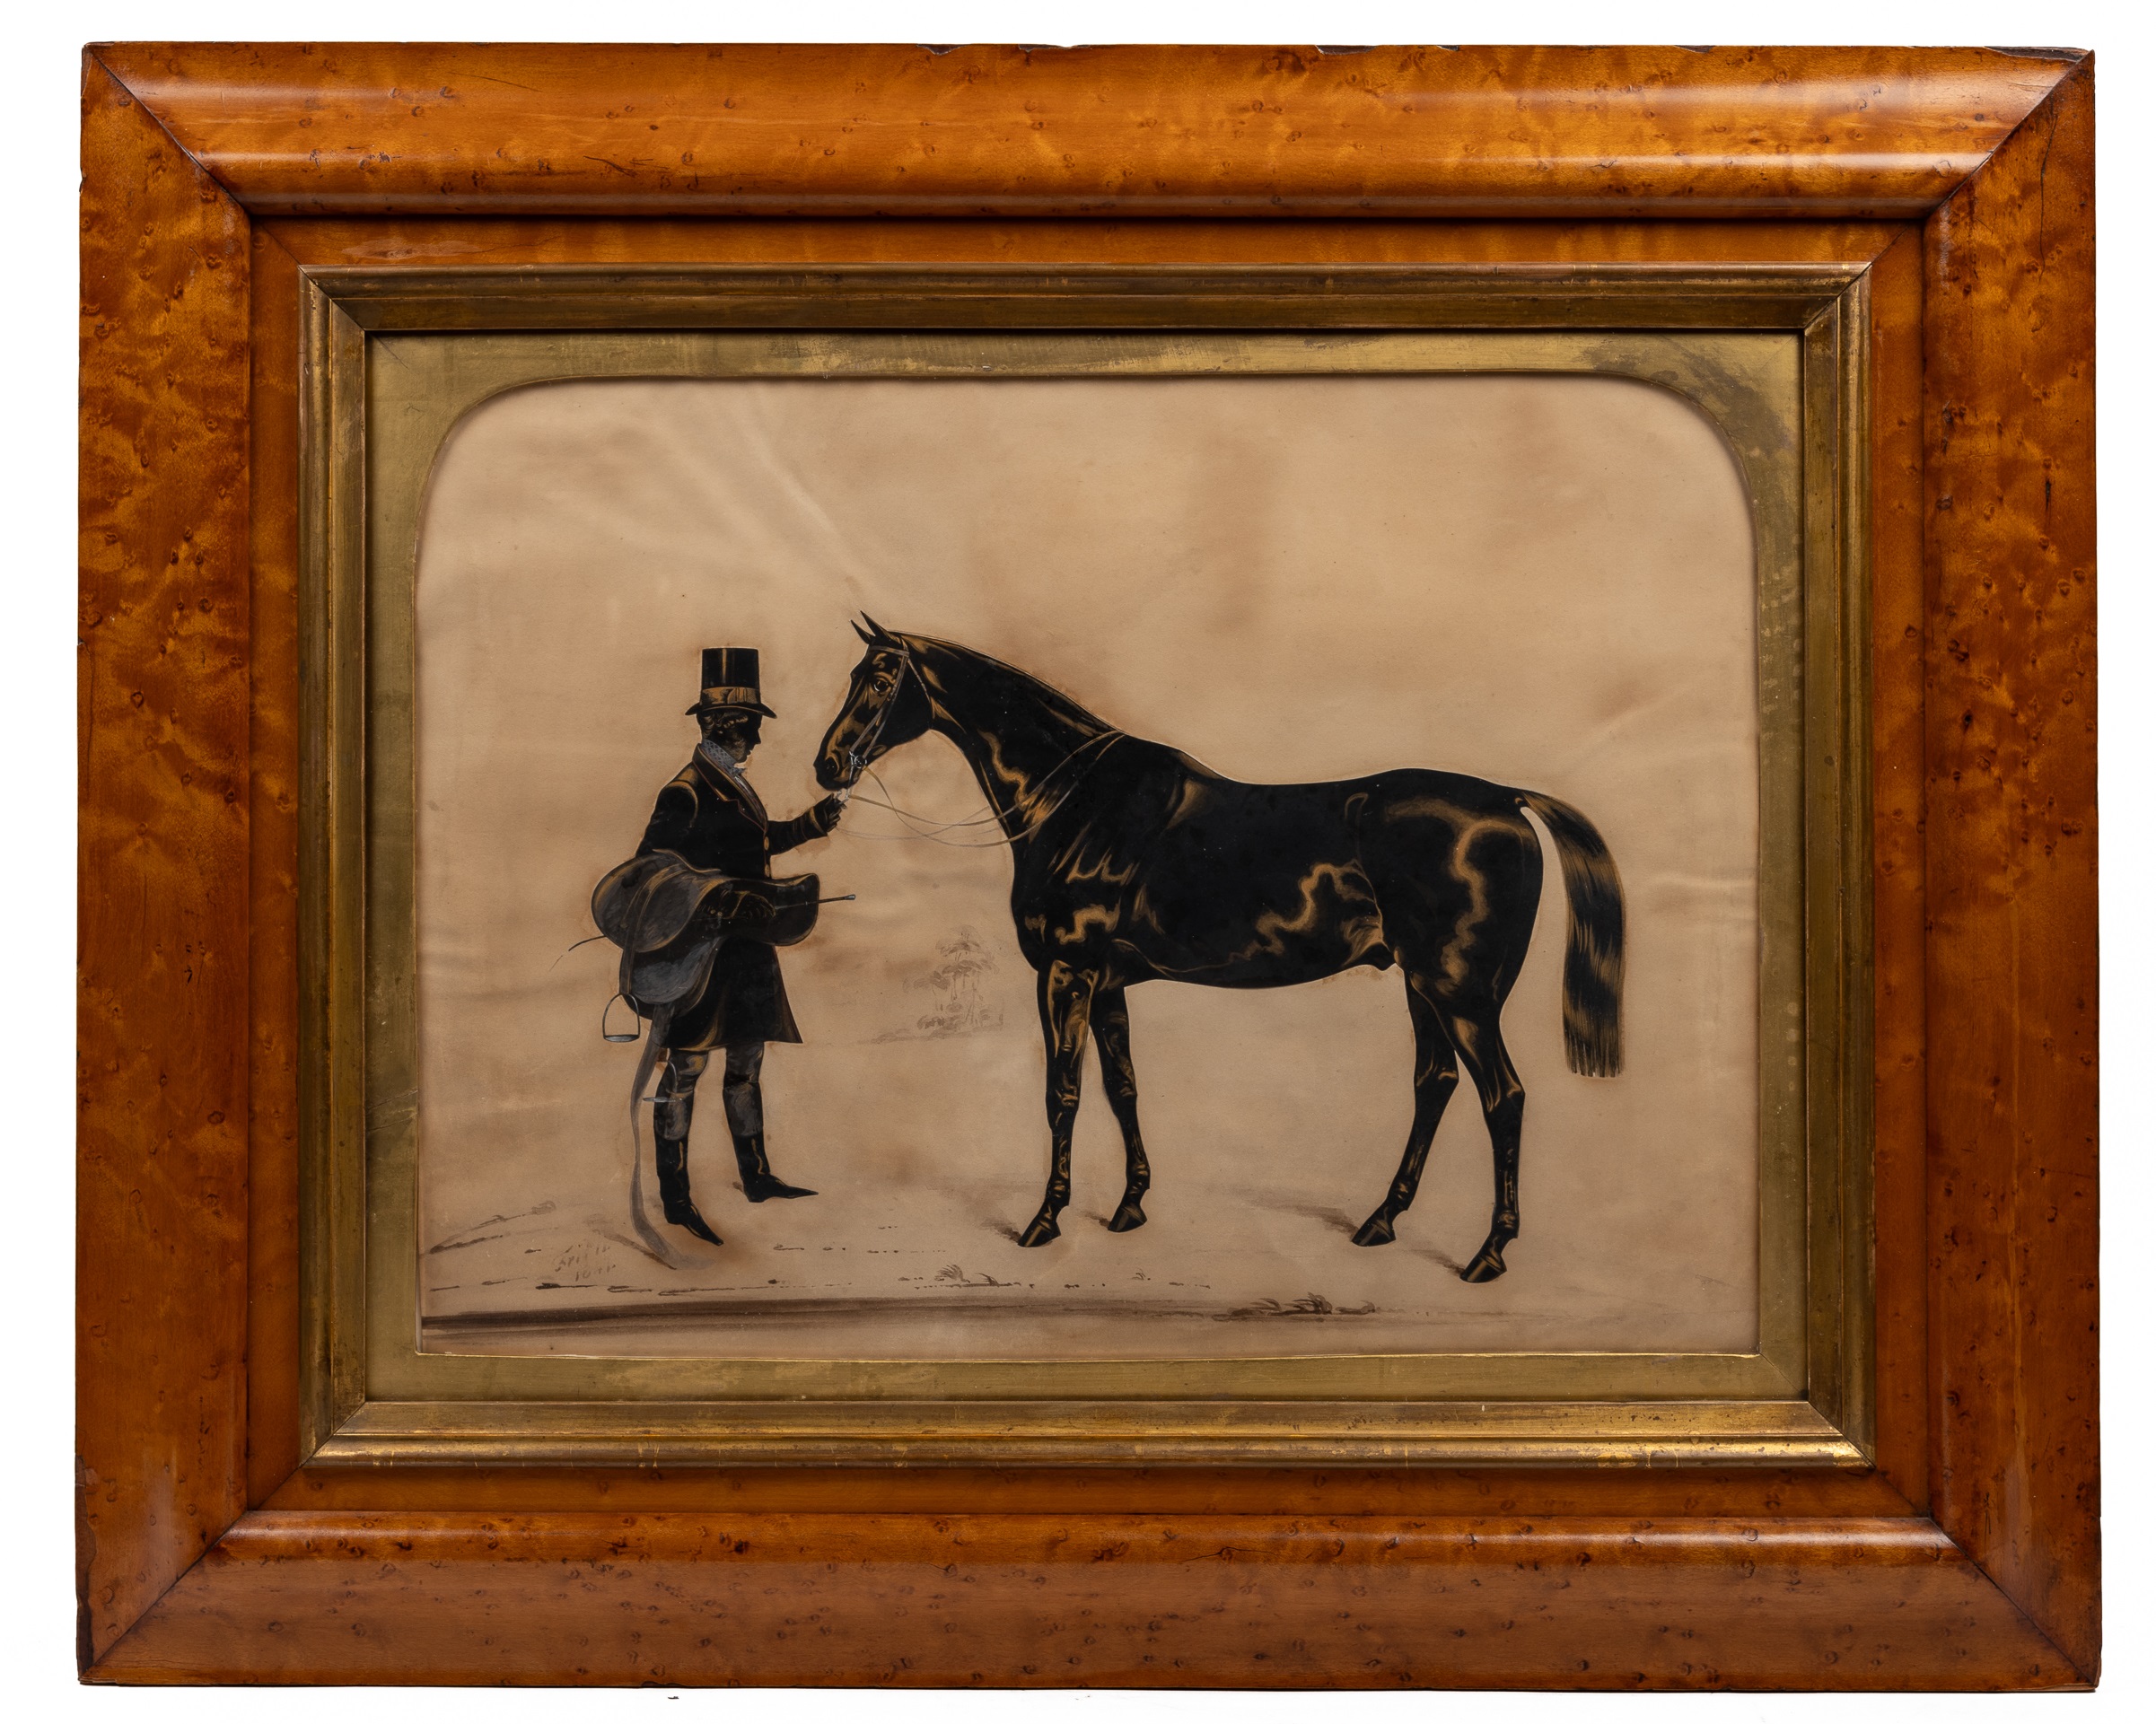 Henry Albert Frith (1837-1854) A huntsman and his horse, silhouette, signed and dated 1847 31cm x